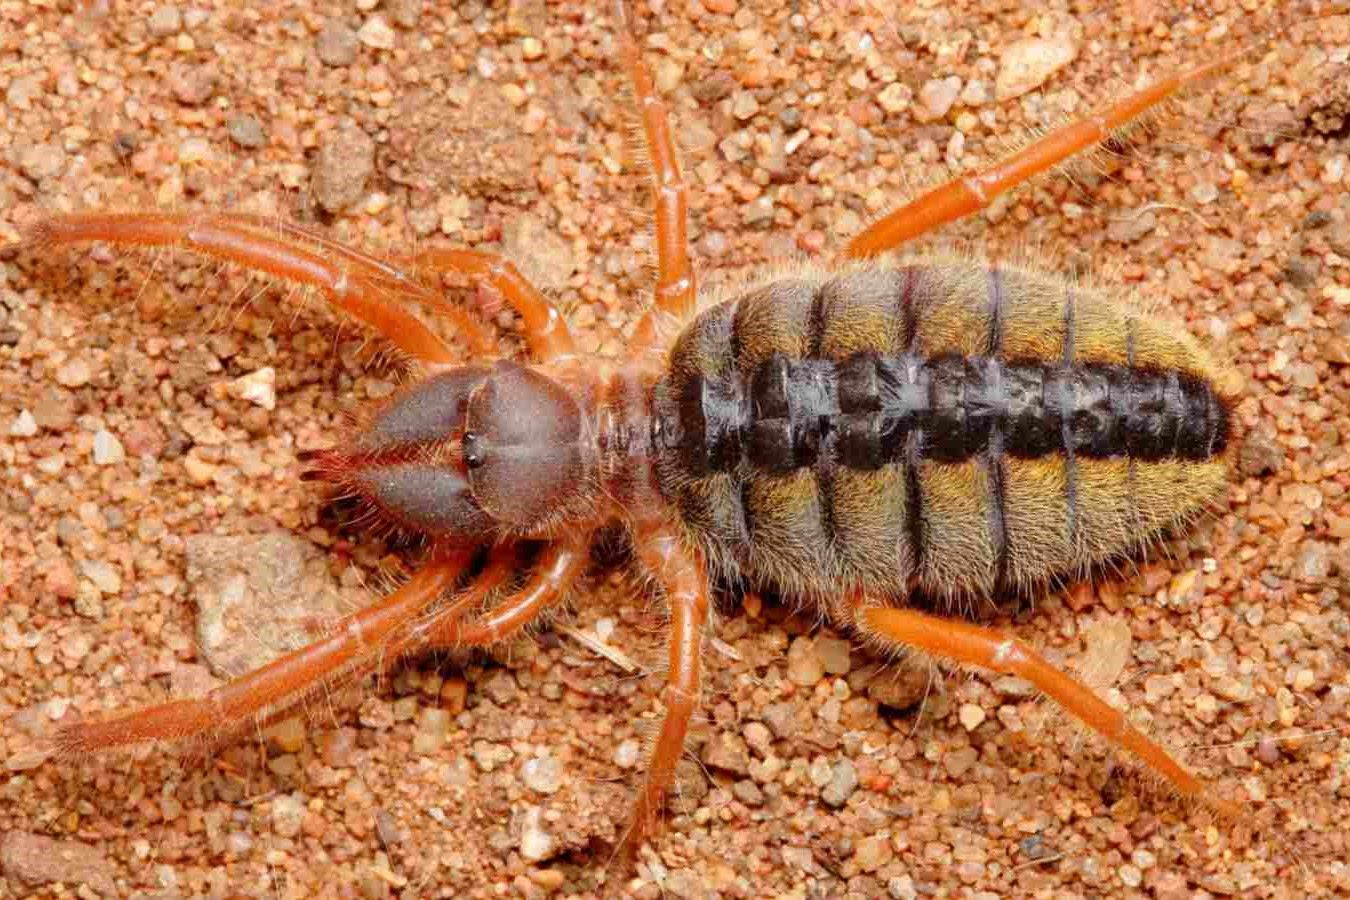 Shocking Encounter: Camel Spider's Deadly Encounter With A Dog